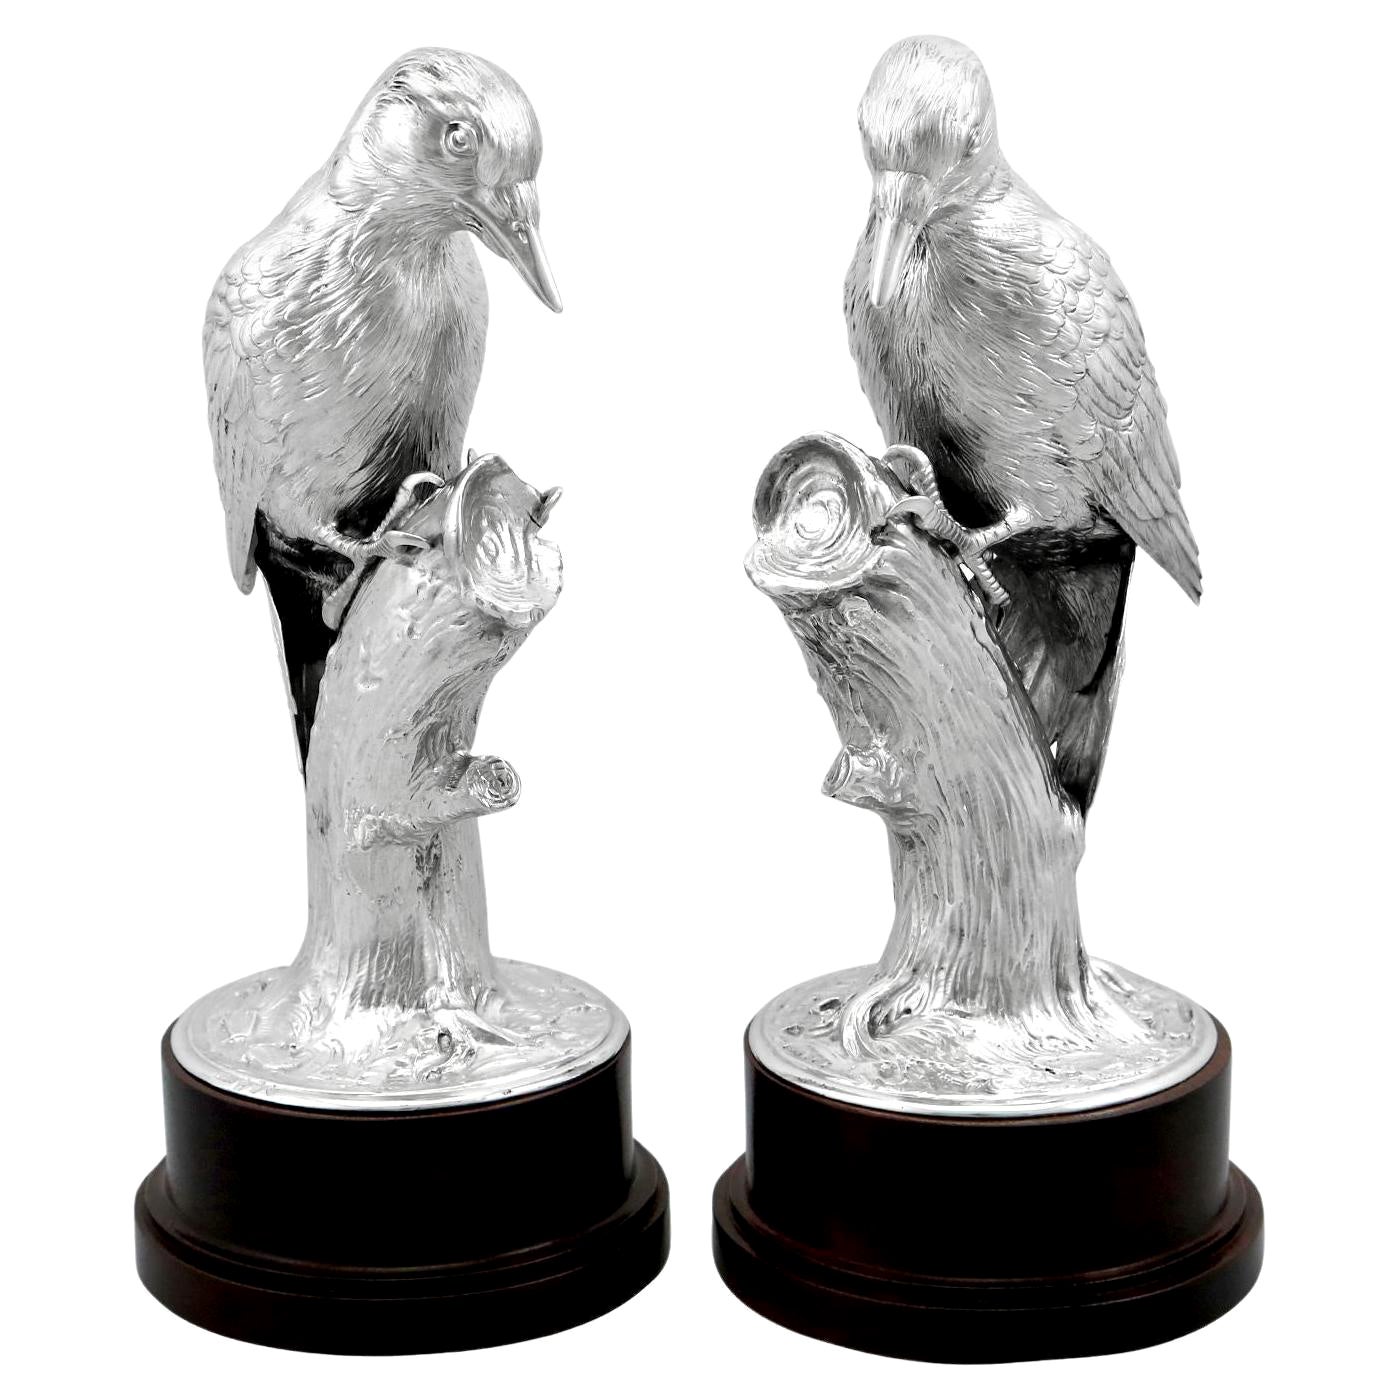 Antique German Sterling Silver Presentation / Table Bird Ornaments For Sale